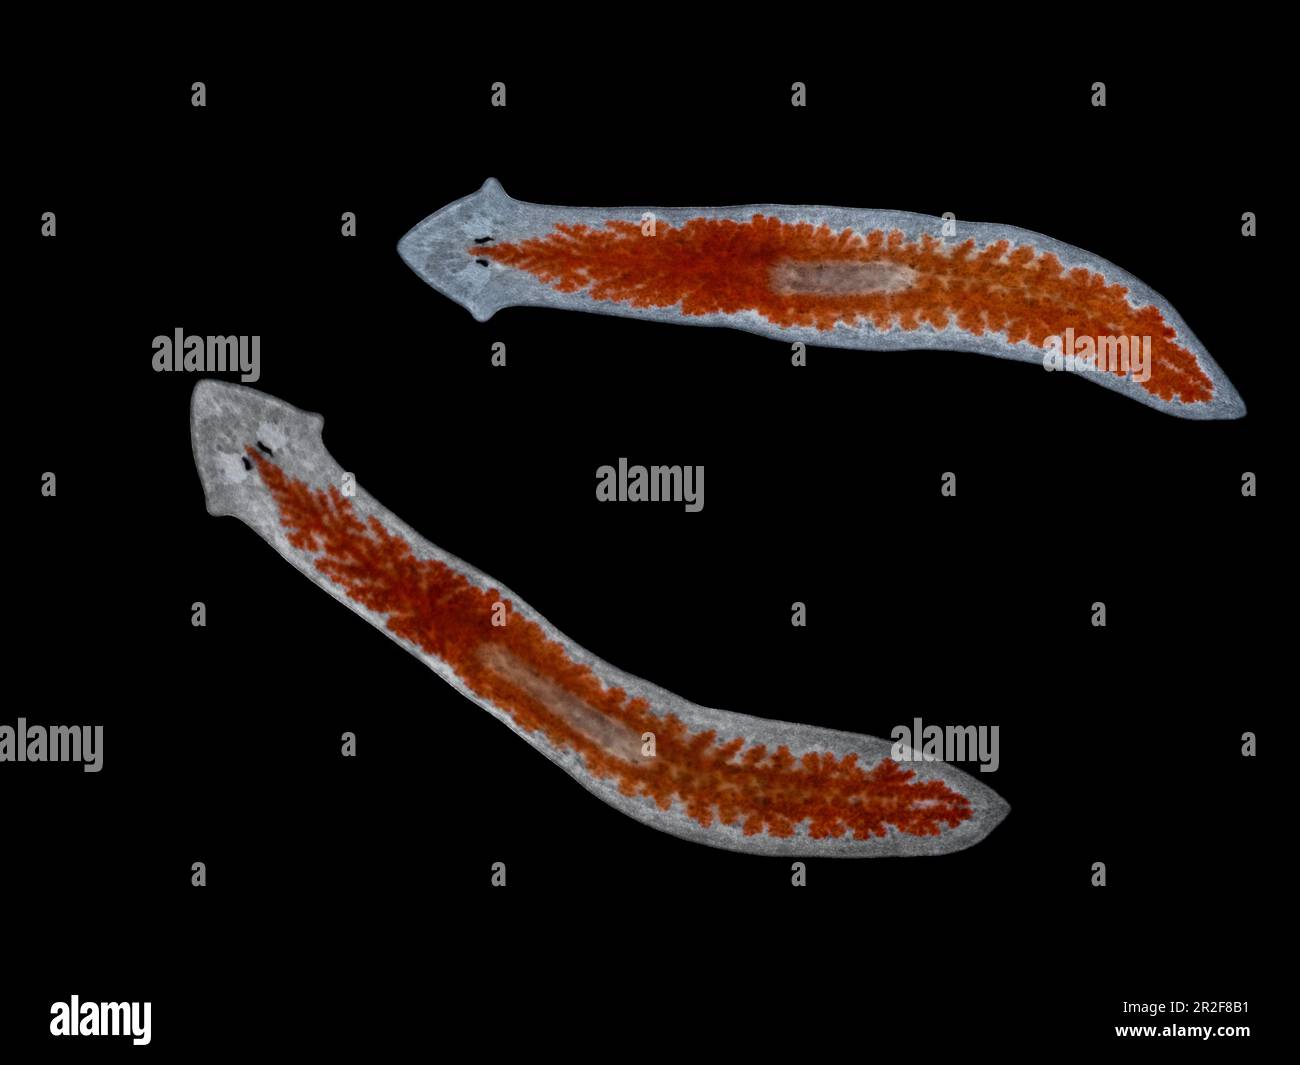 Backlit darkfield image of 2 live aquatic planarian flatworms (Girardia tigrina). The bright red branches of the gut and midline pharynx are clearly v Stock Photo